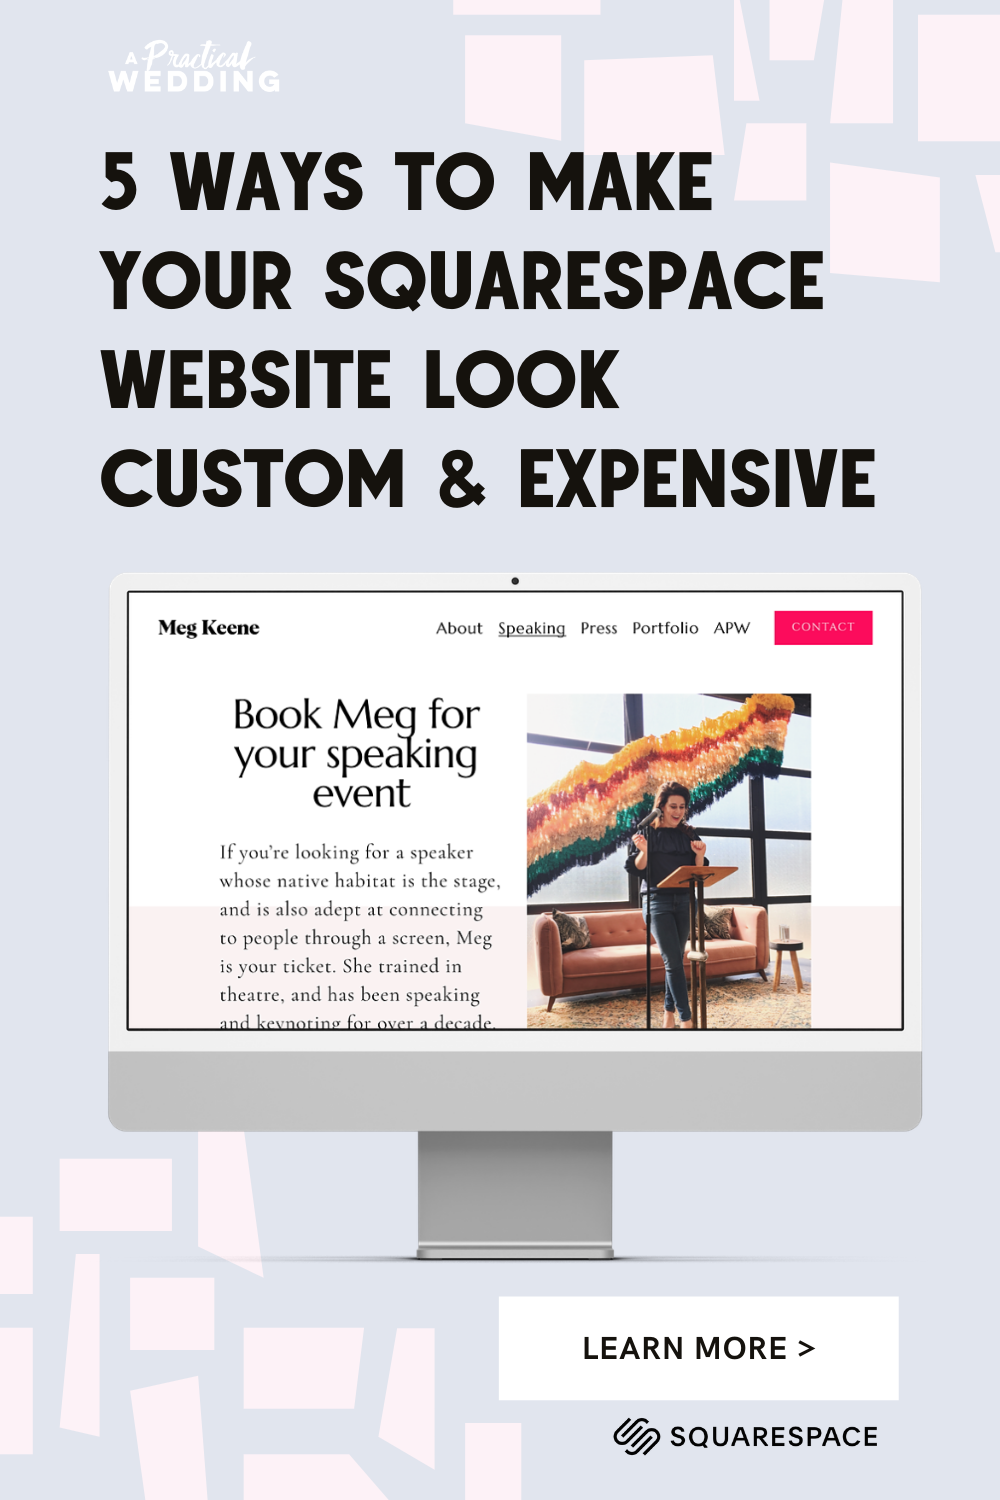 5 Ways to make your Squarespace website look custom expensive - How To Make Your Squarespace Site Look Expensive And Custom